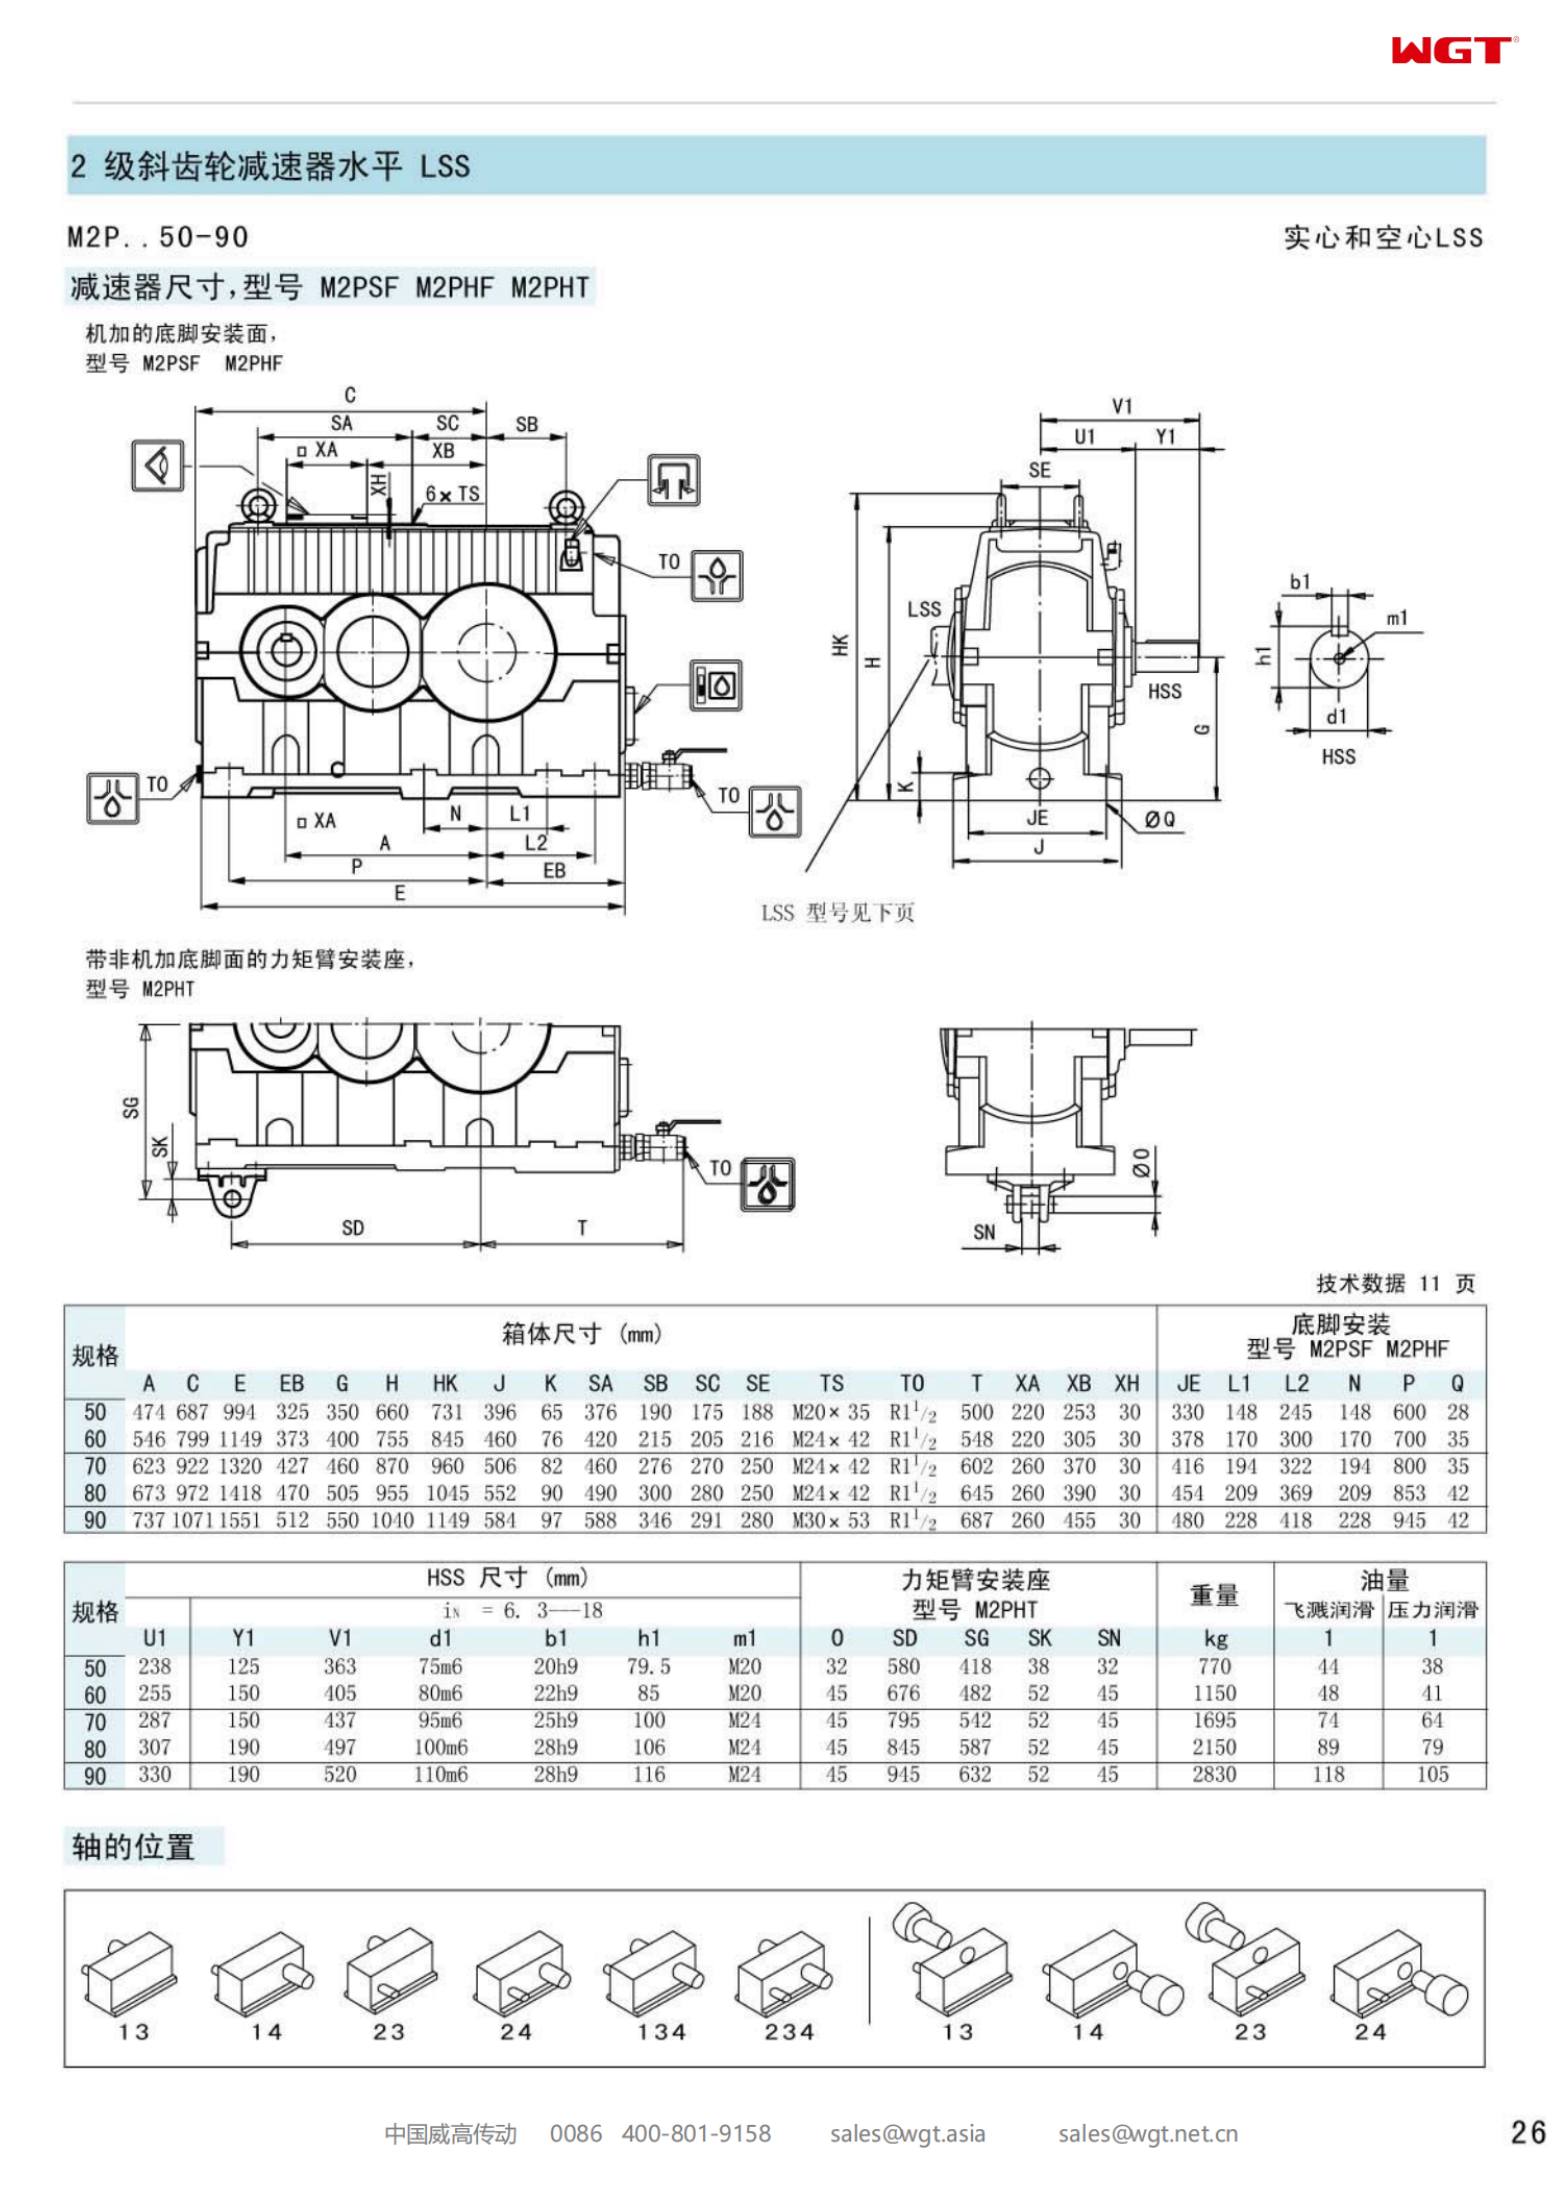 M2PHF50 Replace_SEW_M_Series Gearbox